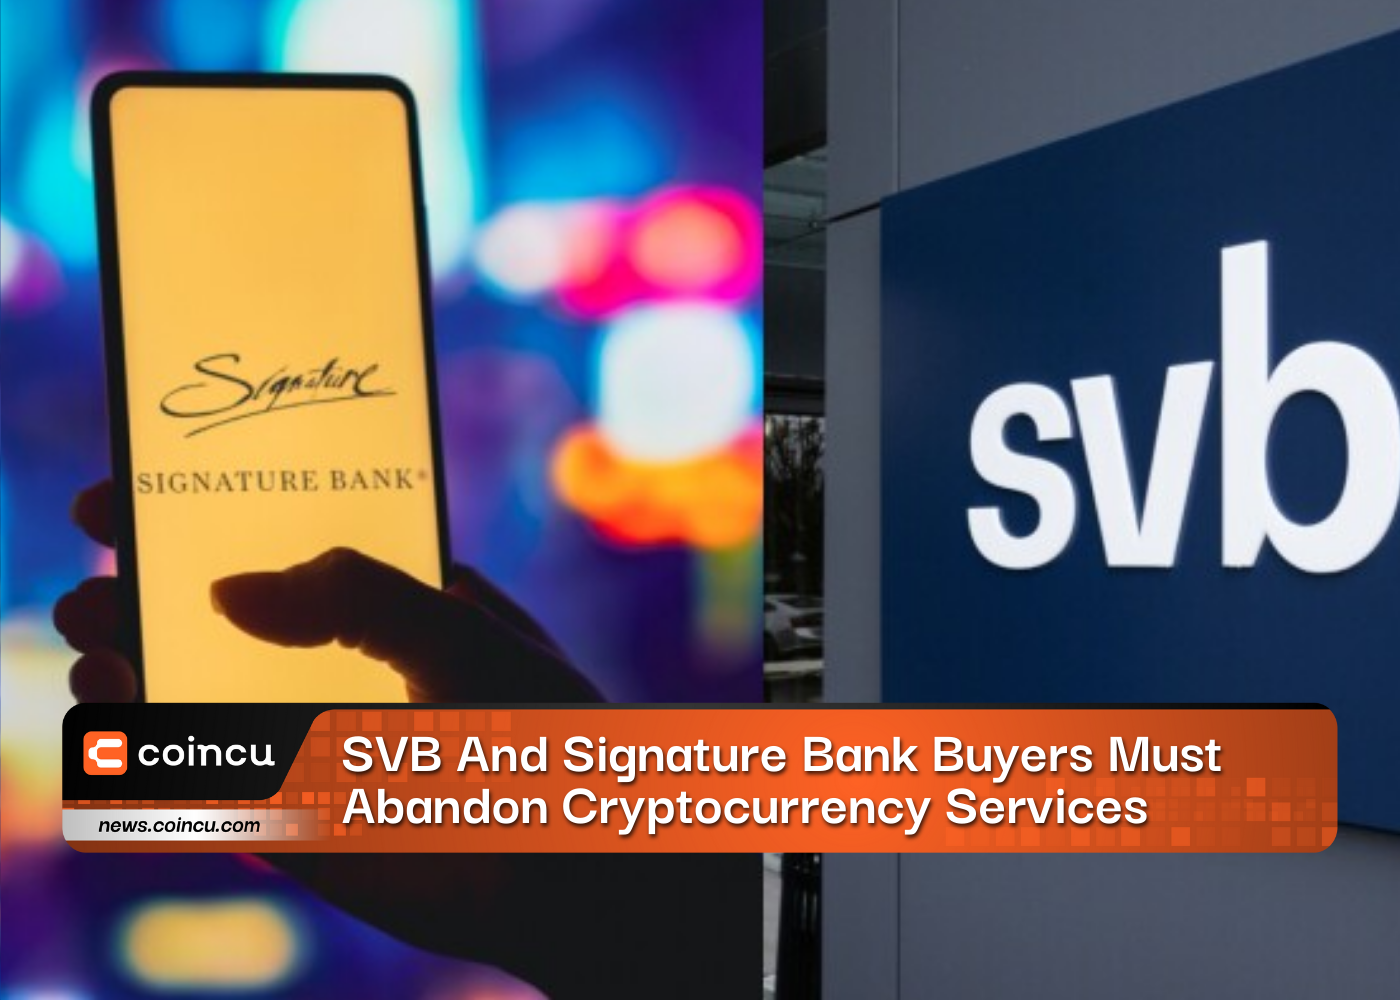 SVB And Signature Bank Buyers Must Abandon Cryptocurrency Services